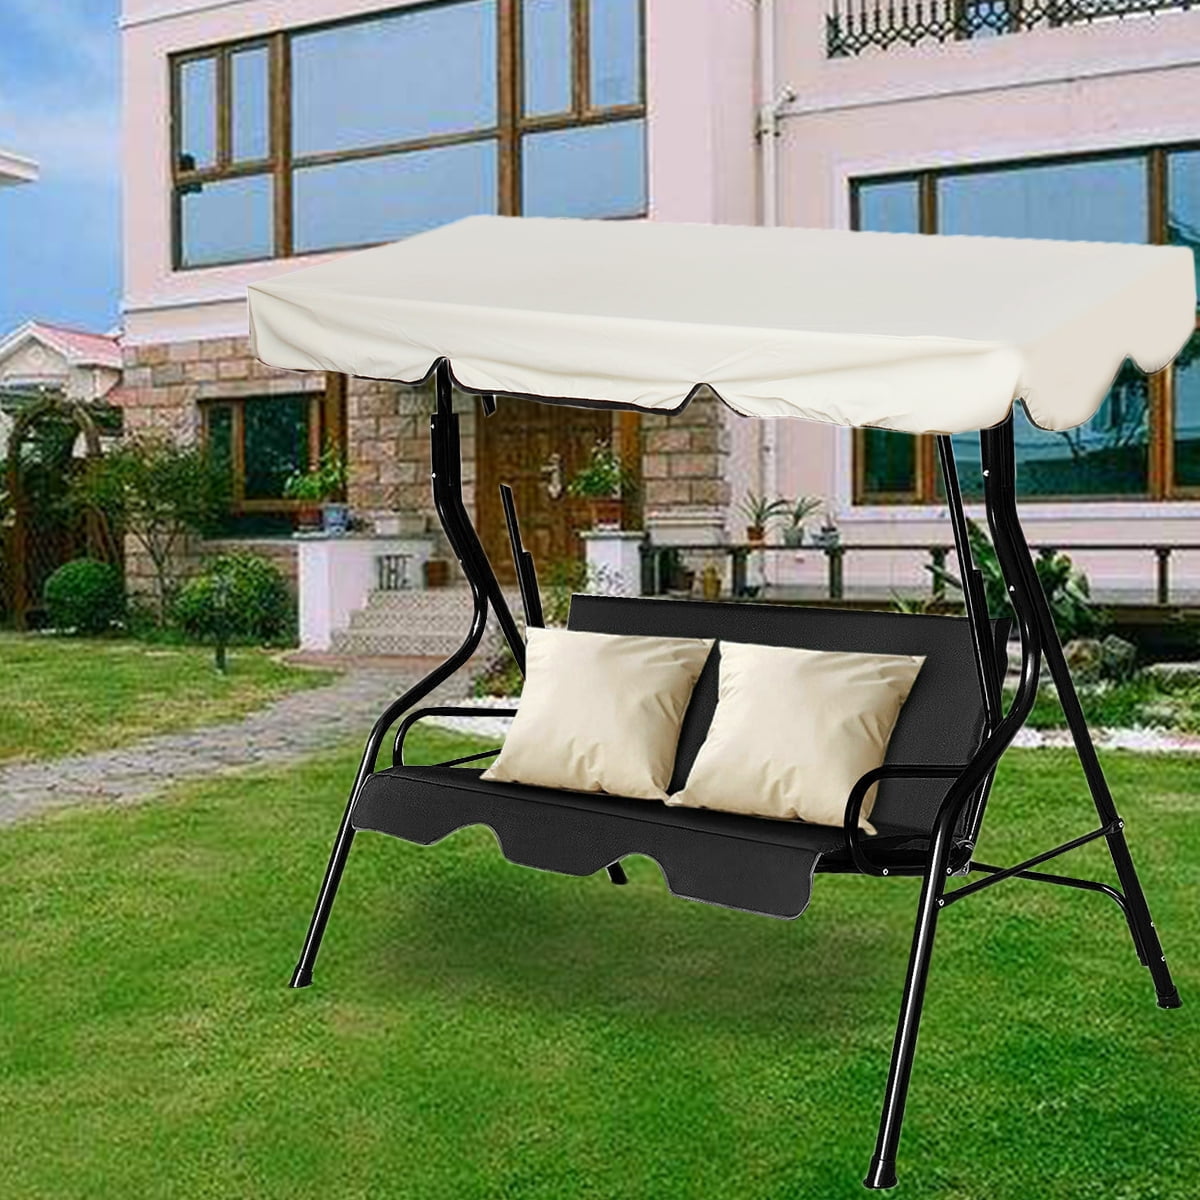 2 3 Seater Garden Swing Chair Cover Replacement Canopy Spare Fabric Sun Waterproof Outdoor Sunshade Canada - Patio Swing Seat Fabric Replacement